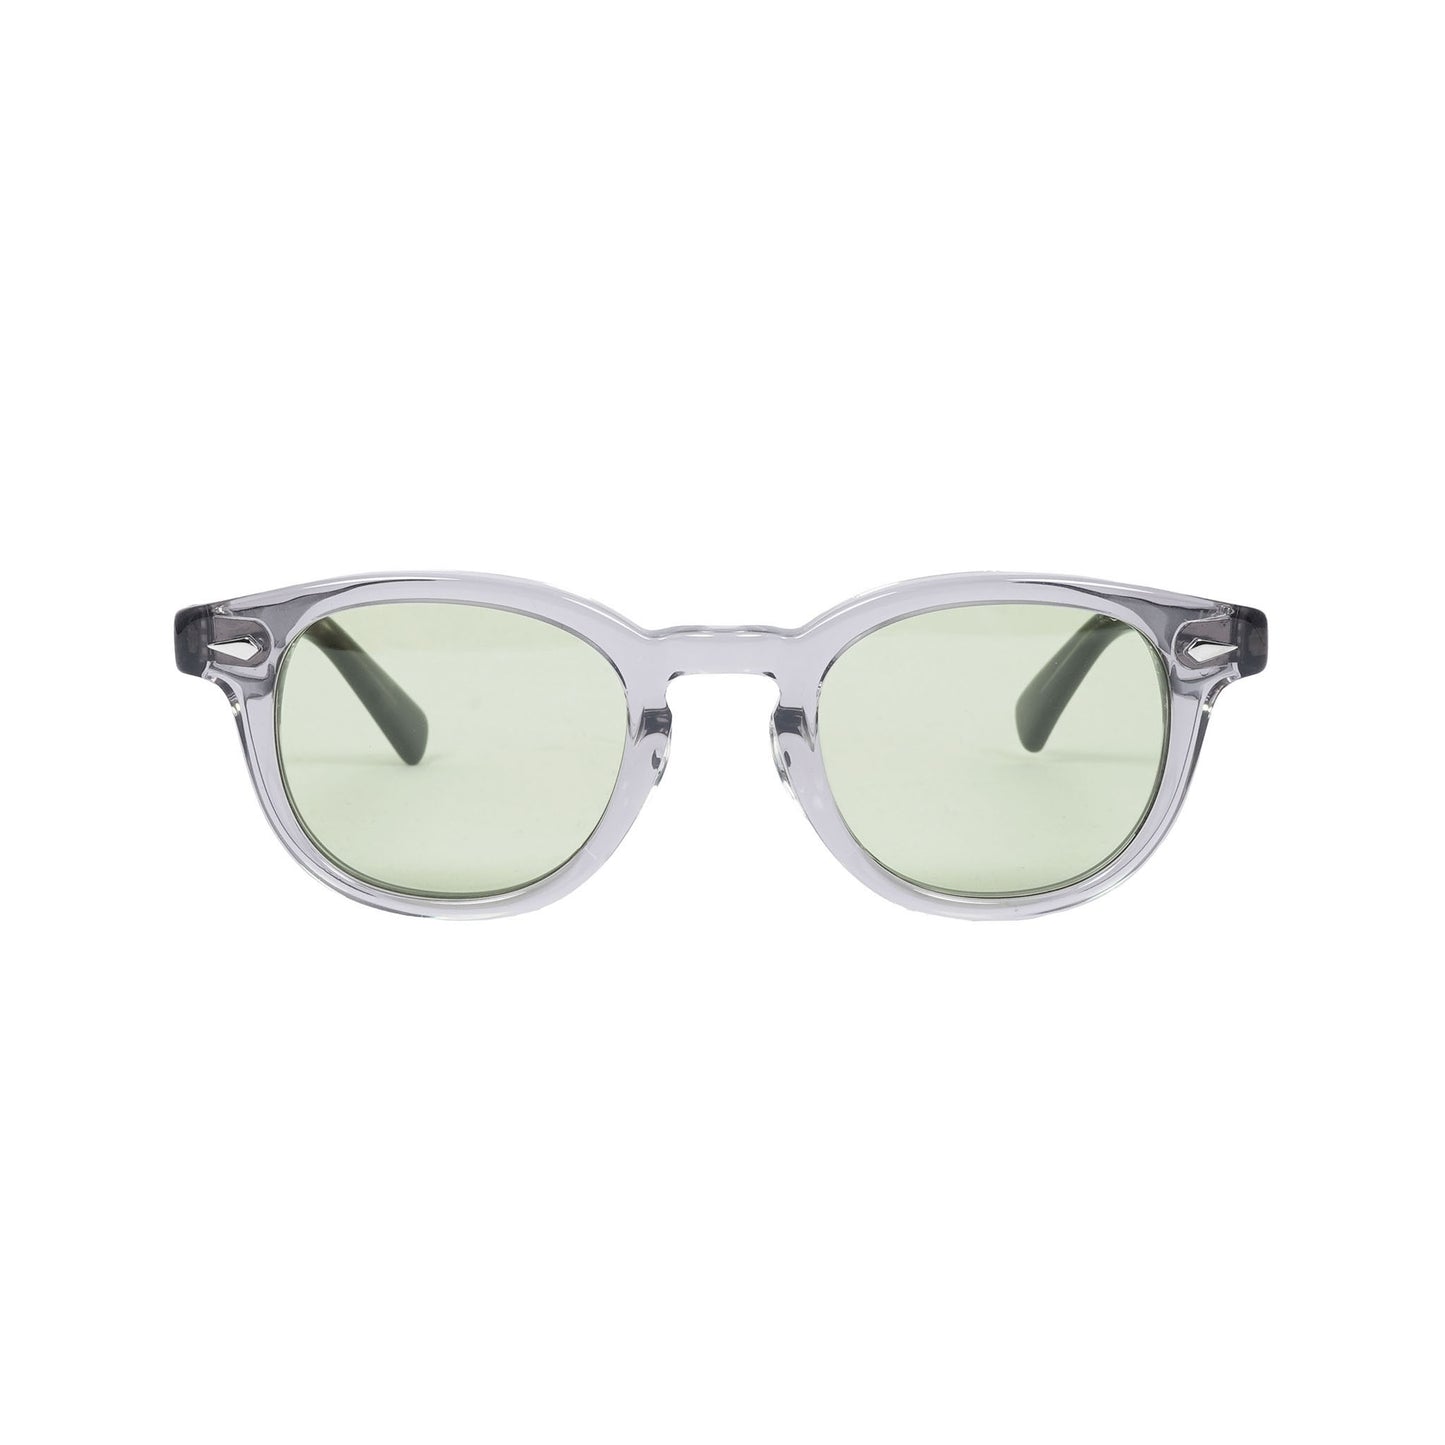 ACE gray clear x gray marble / green lens